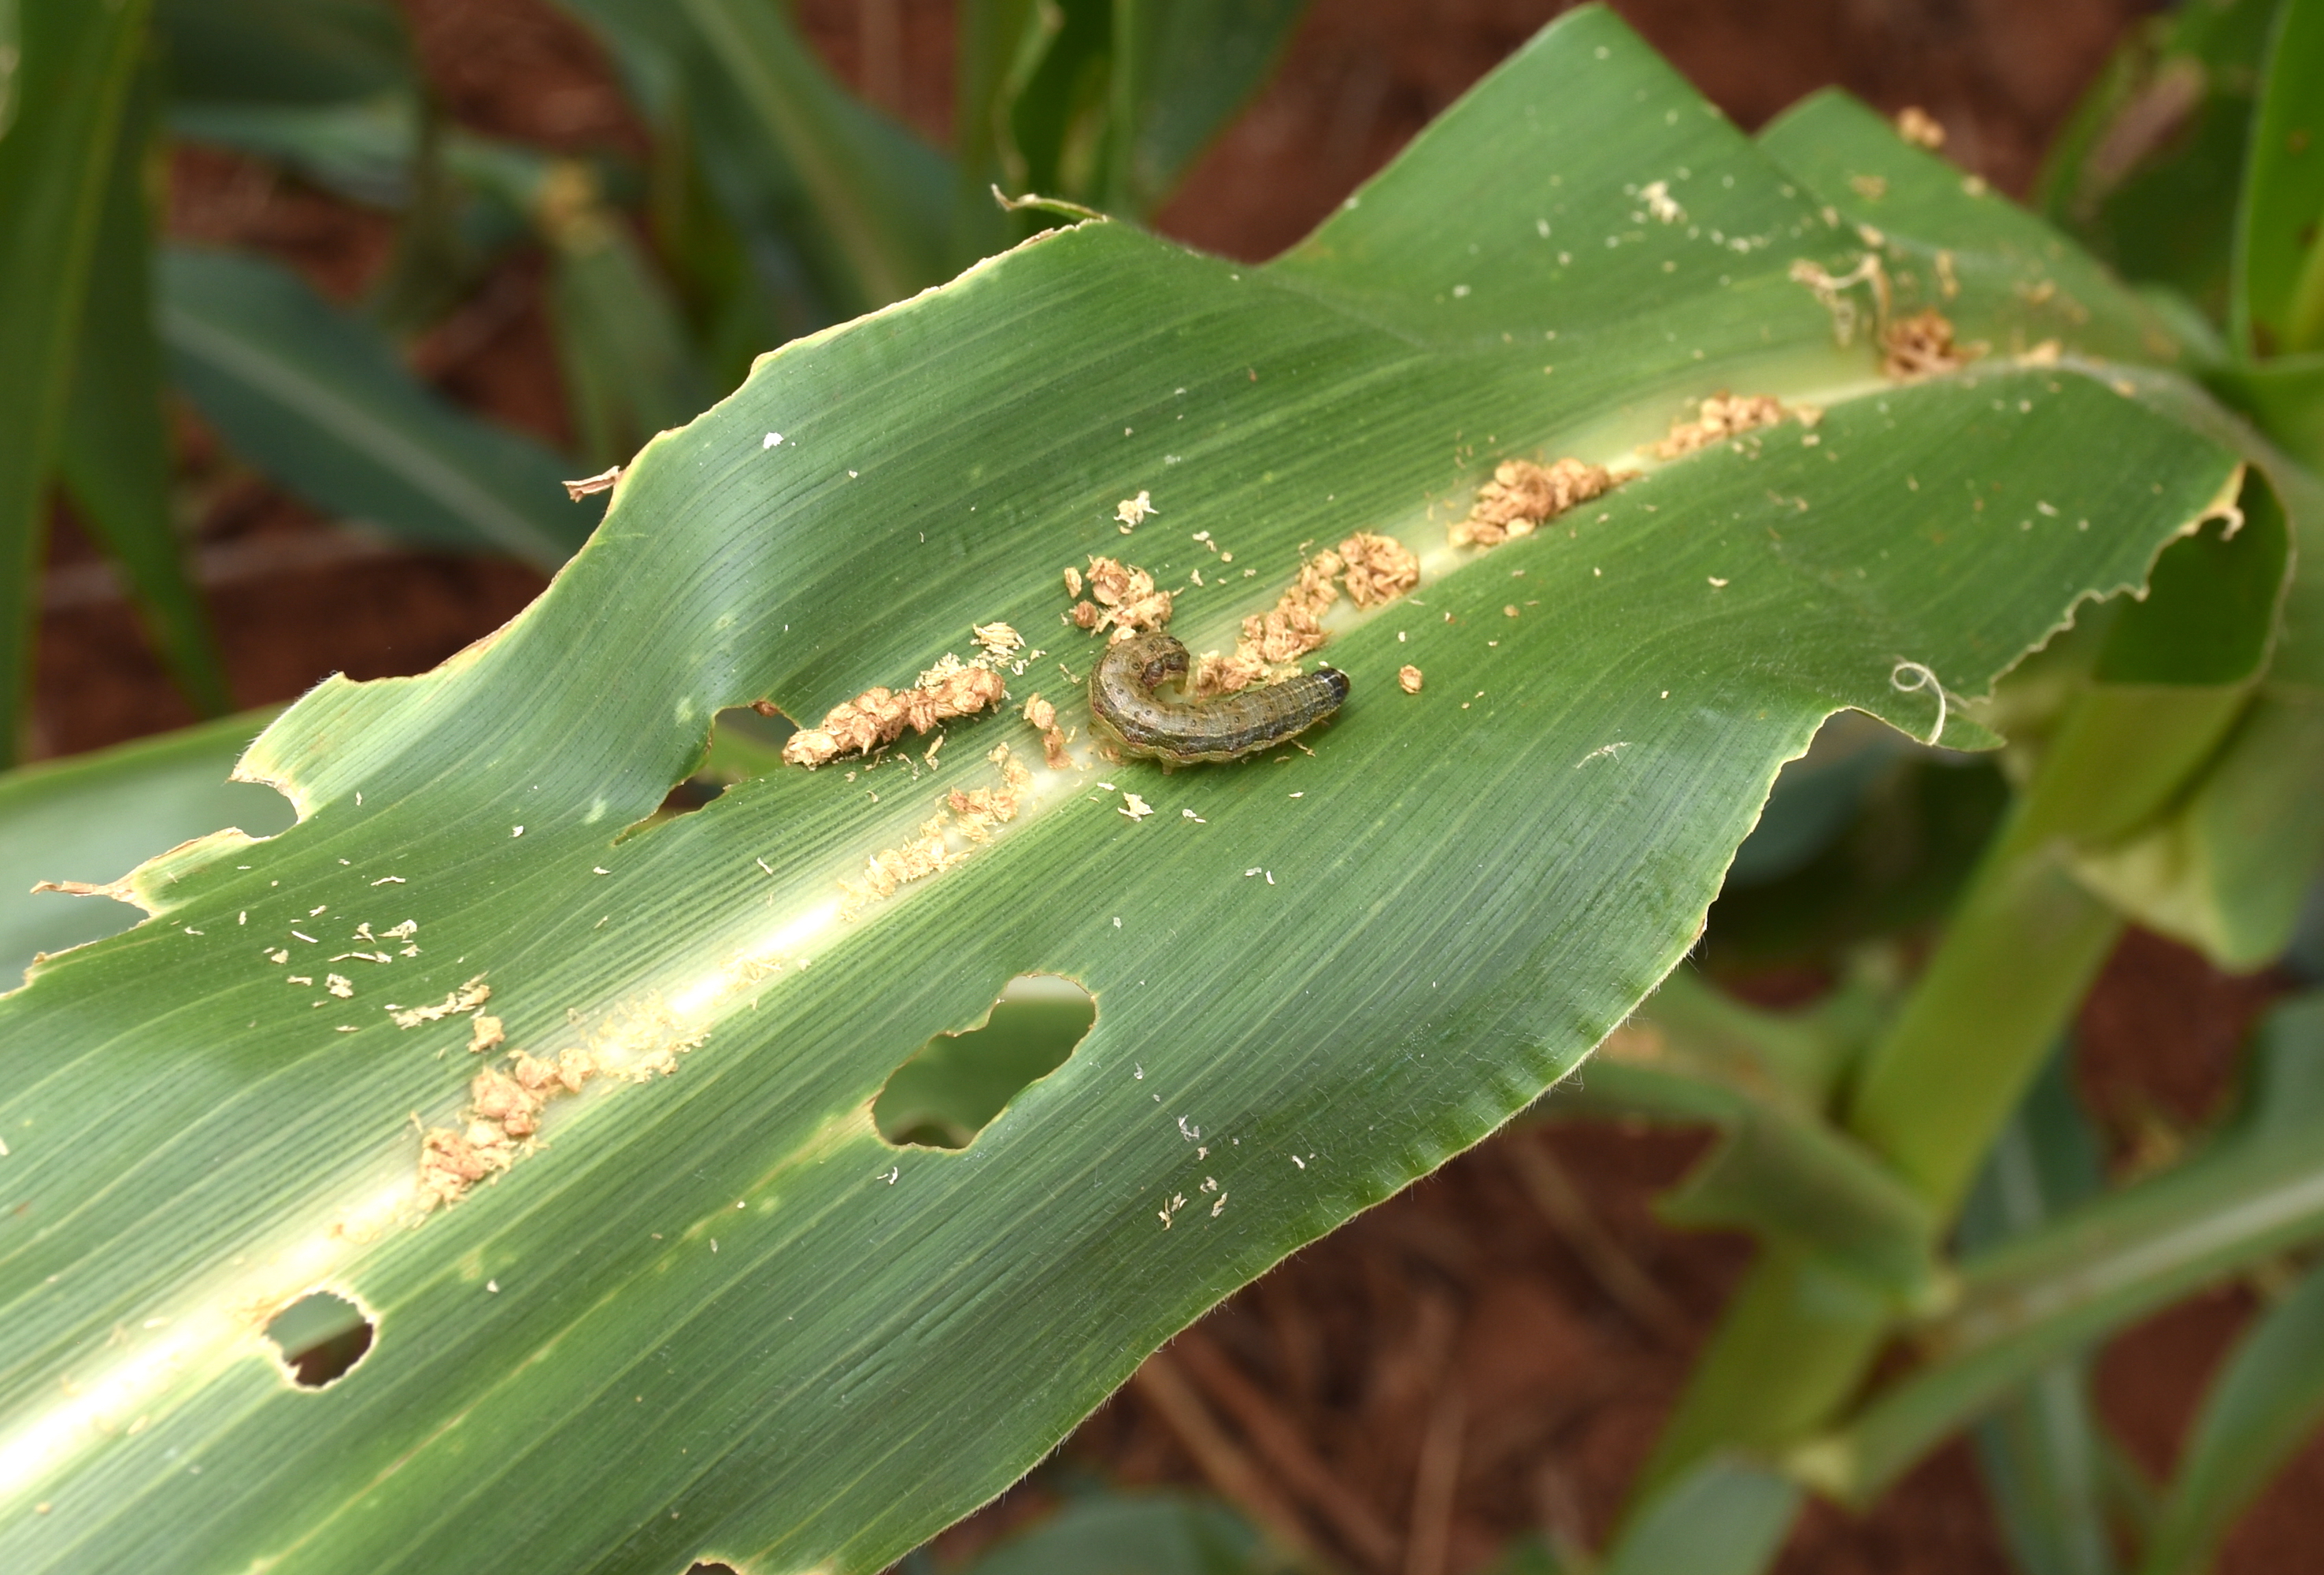 A fall armyworm curls up among the debris of the maize plant it has just eaten at CIMMYT’s screenhouse in Kiboko, Kenya. (Photo: Jennifer Johnson/CIMMYT)